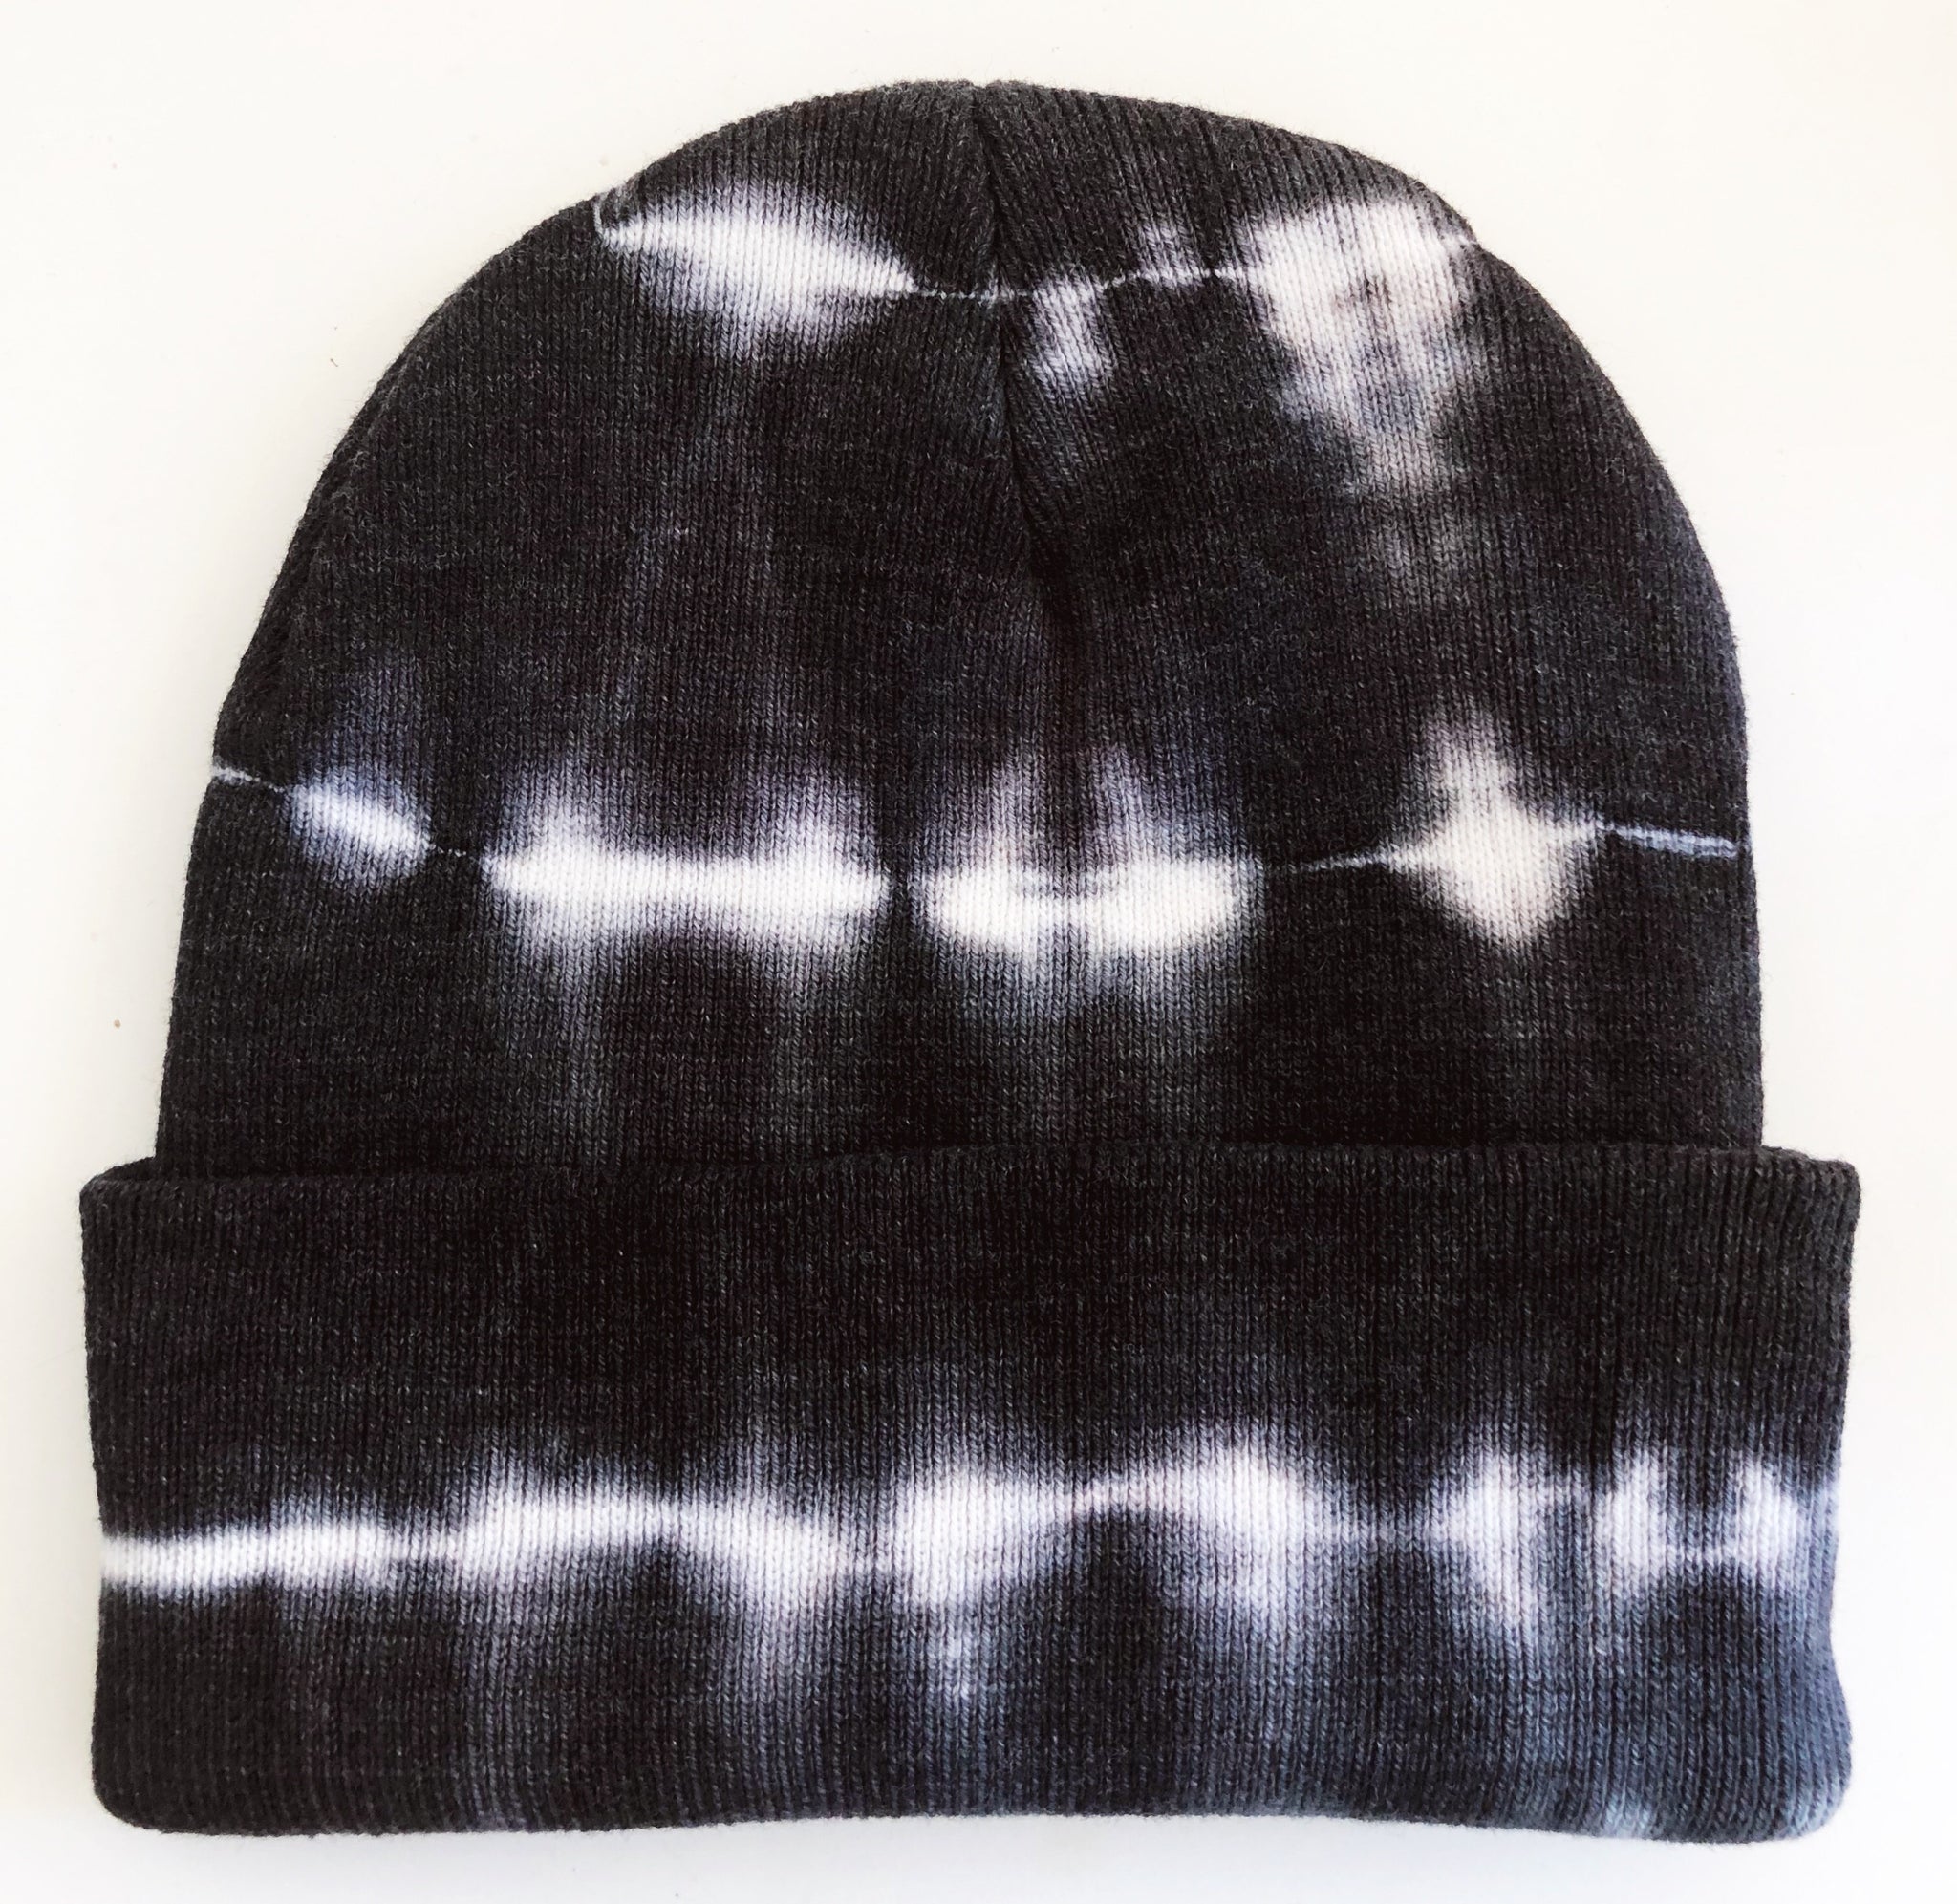 Shop our 2019 Holiday Gift Guide. Unisex Tie-Dye Beanie Hats, Best Clothing Gift Under $50.00 USD.